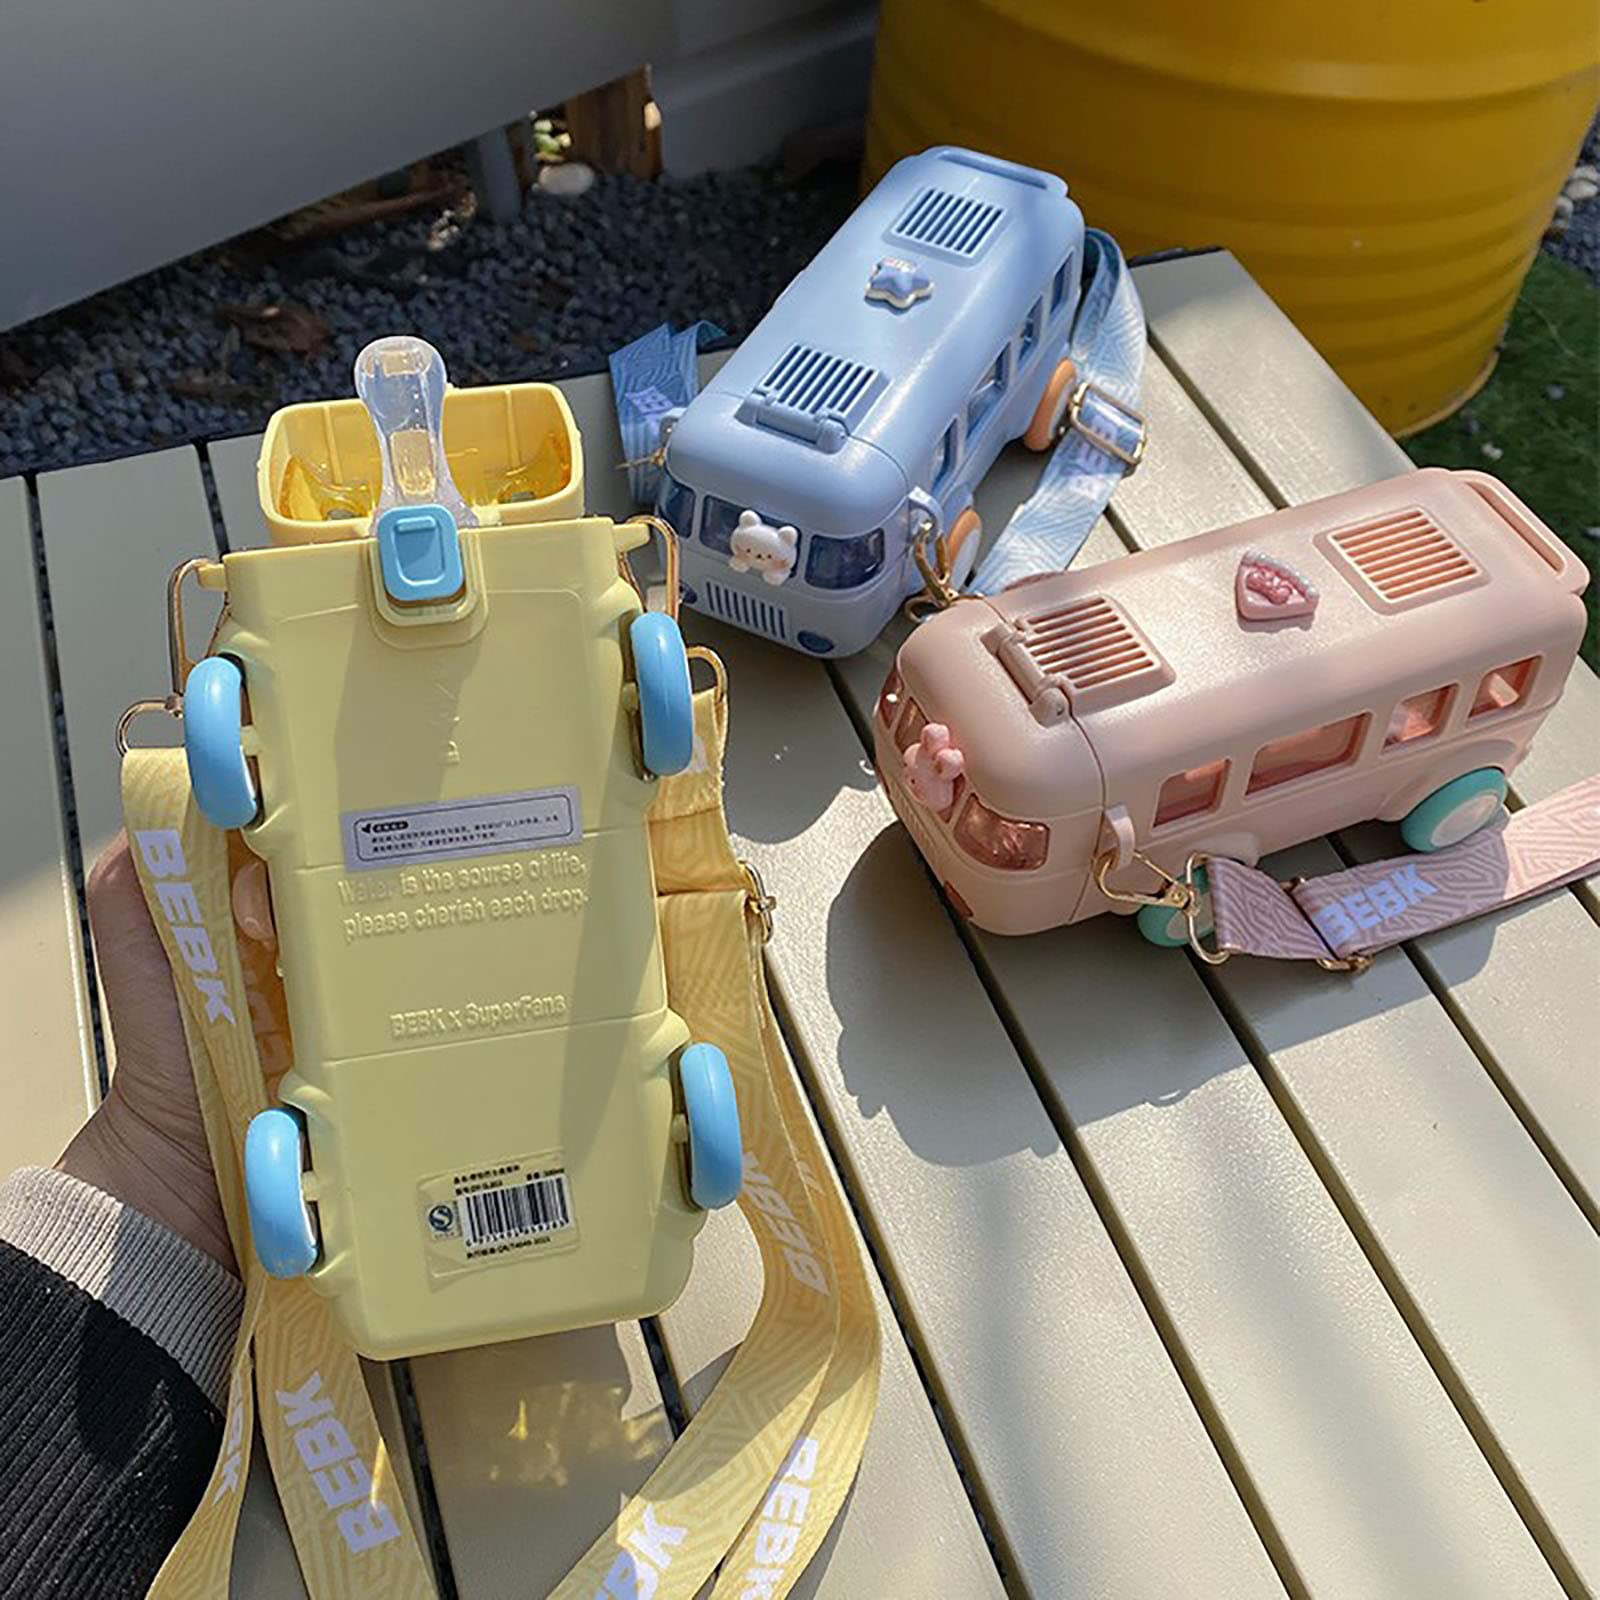 School Bus Shaped Water Bottle With Straw, Anti-fall Kids Car Cup